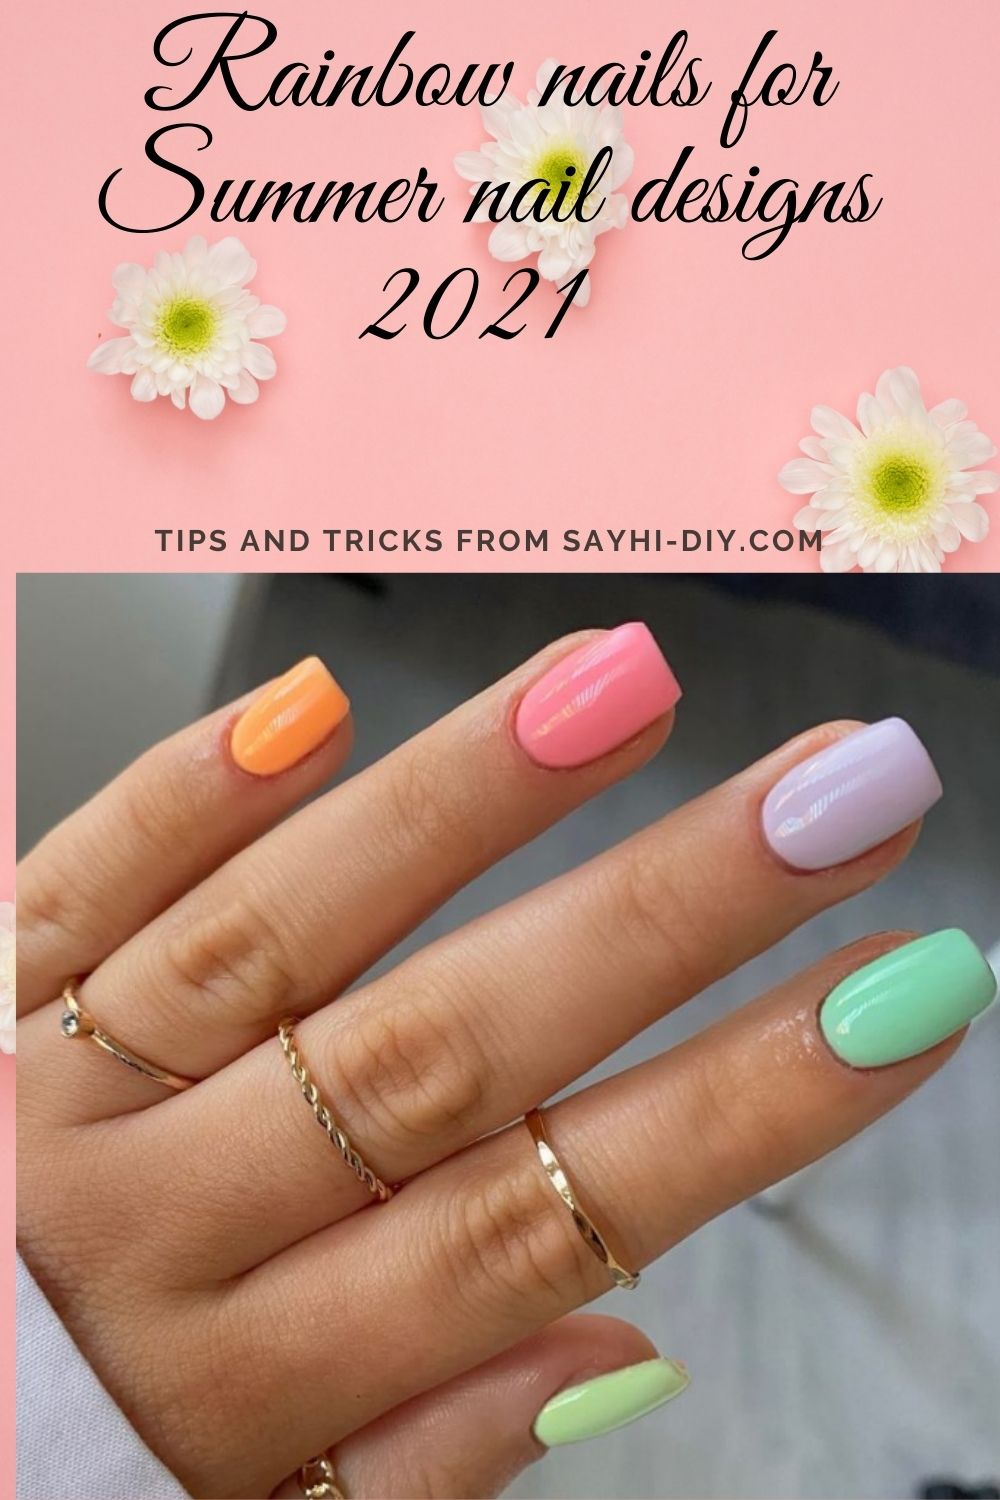 37 Bright Neon orange nails for summer nail colors 2022 - Mycozylive.com